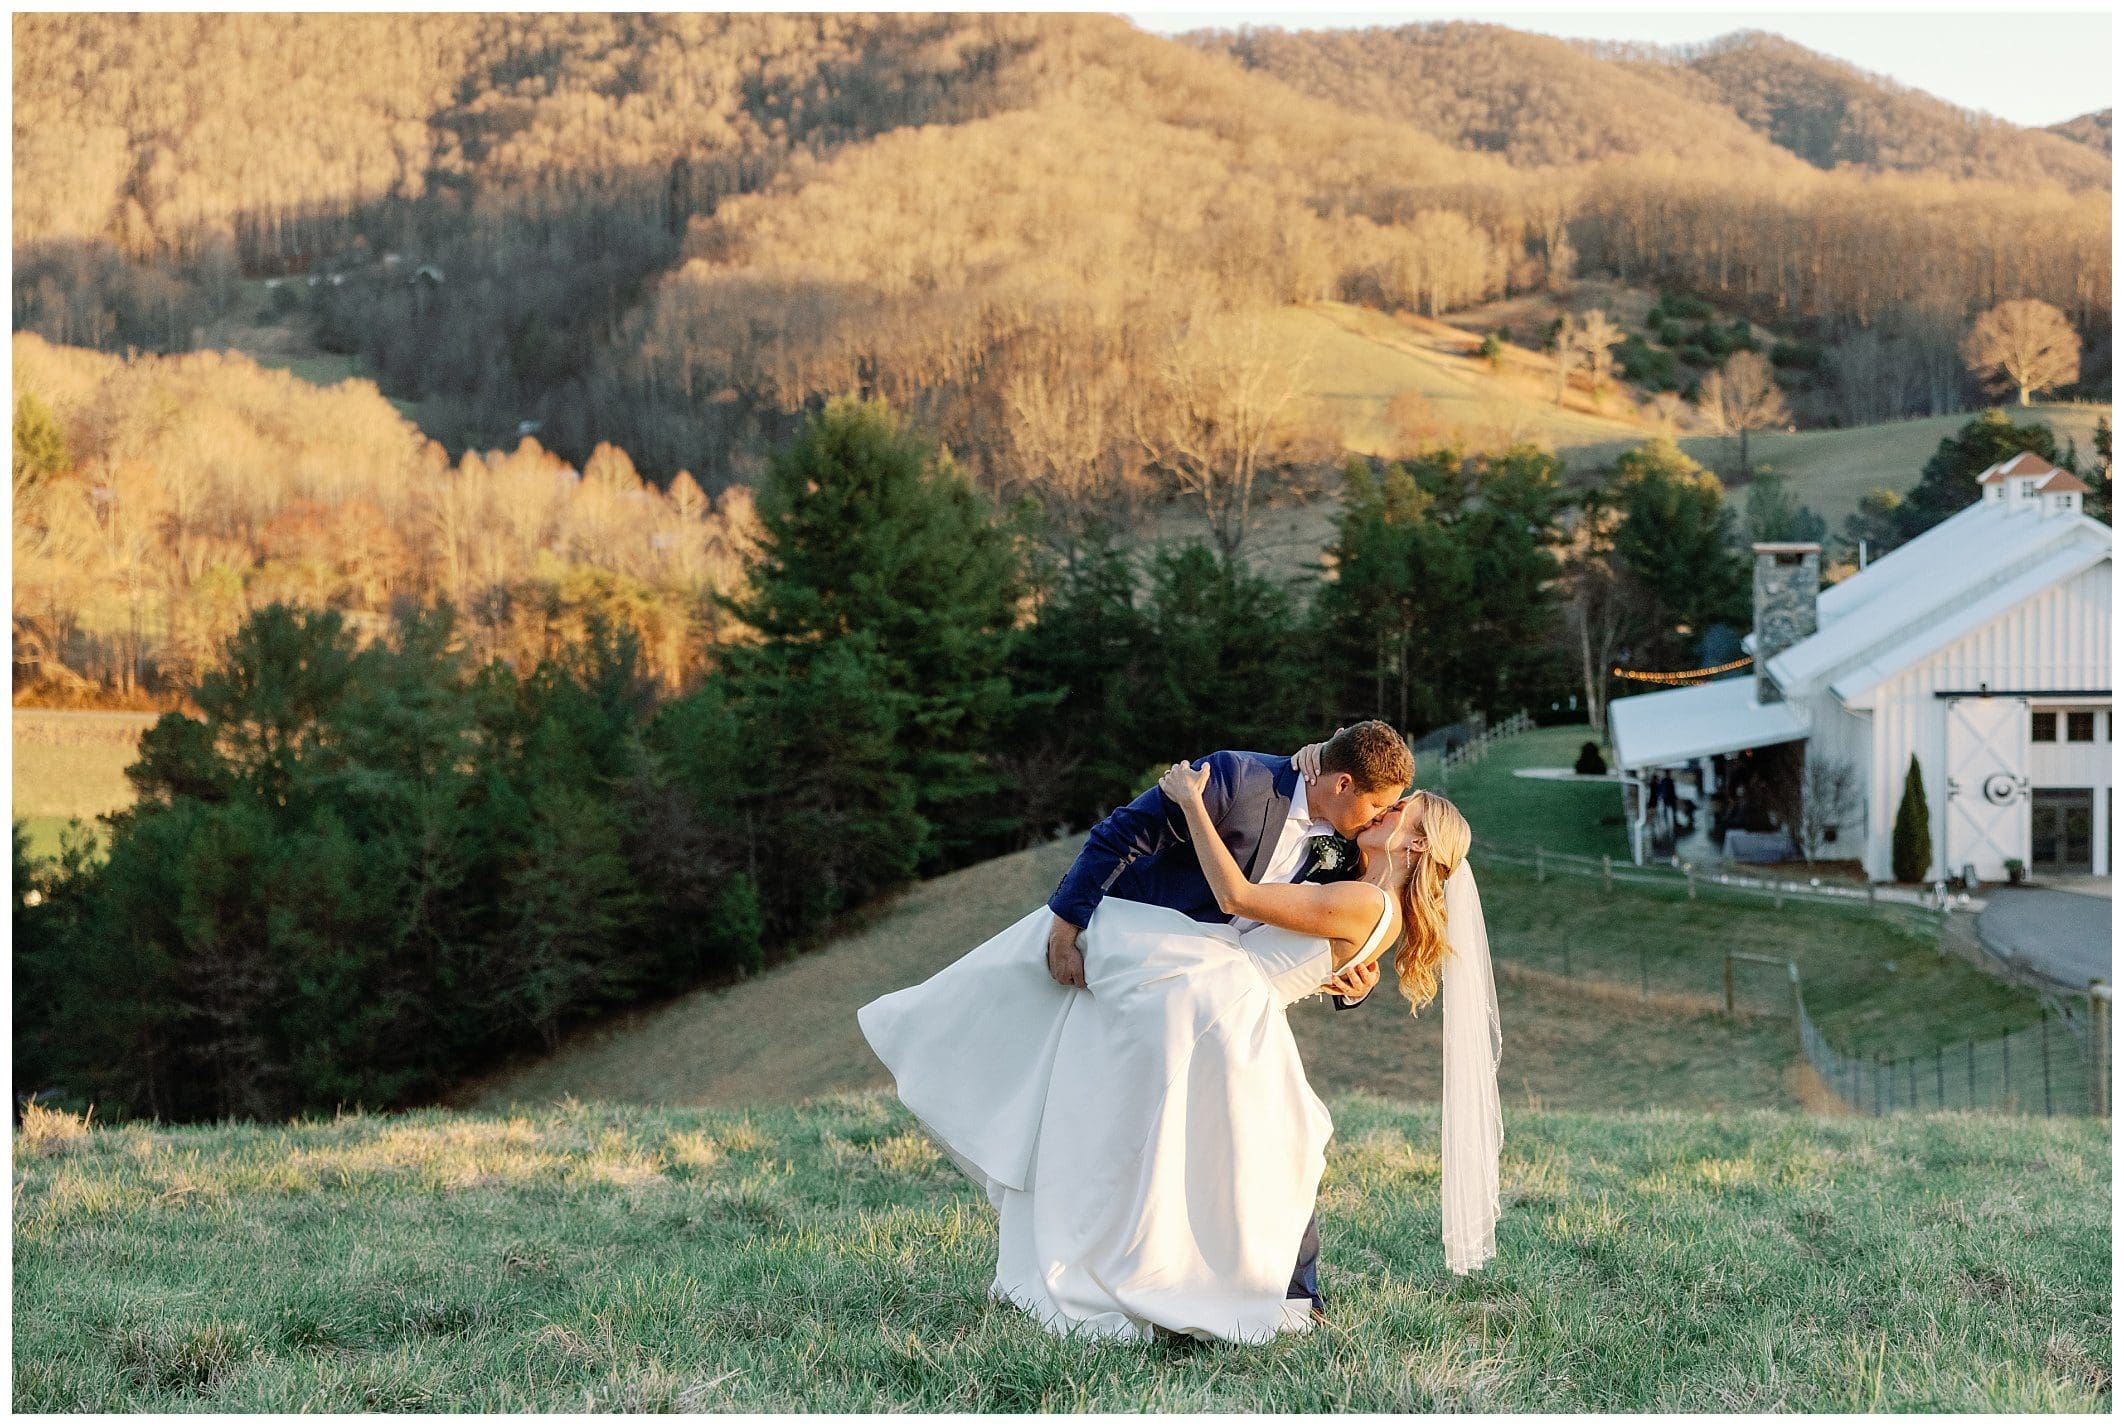 A bride and groom kissing in front of a mountain.